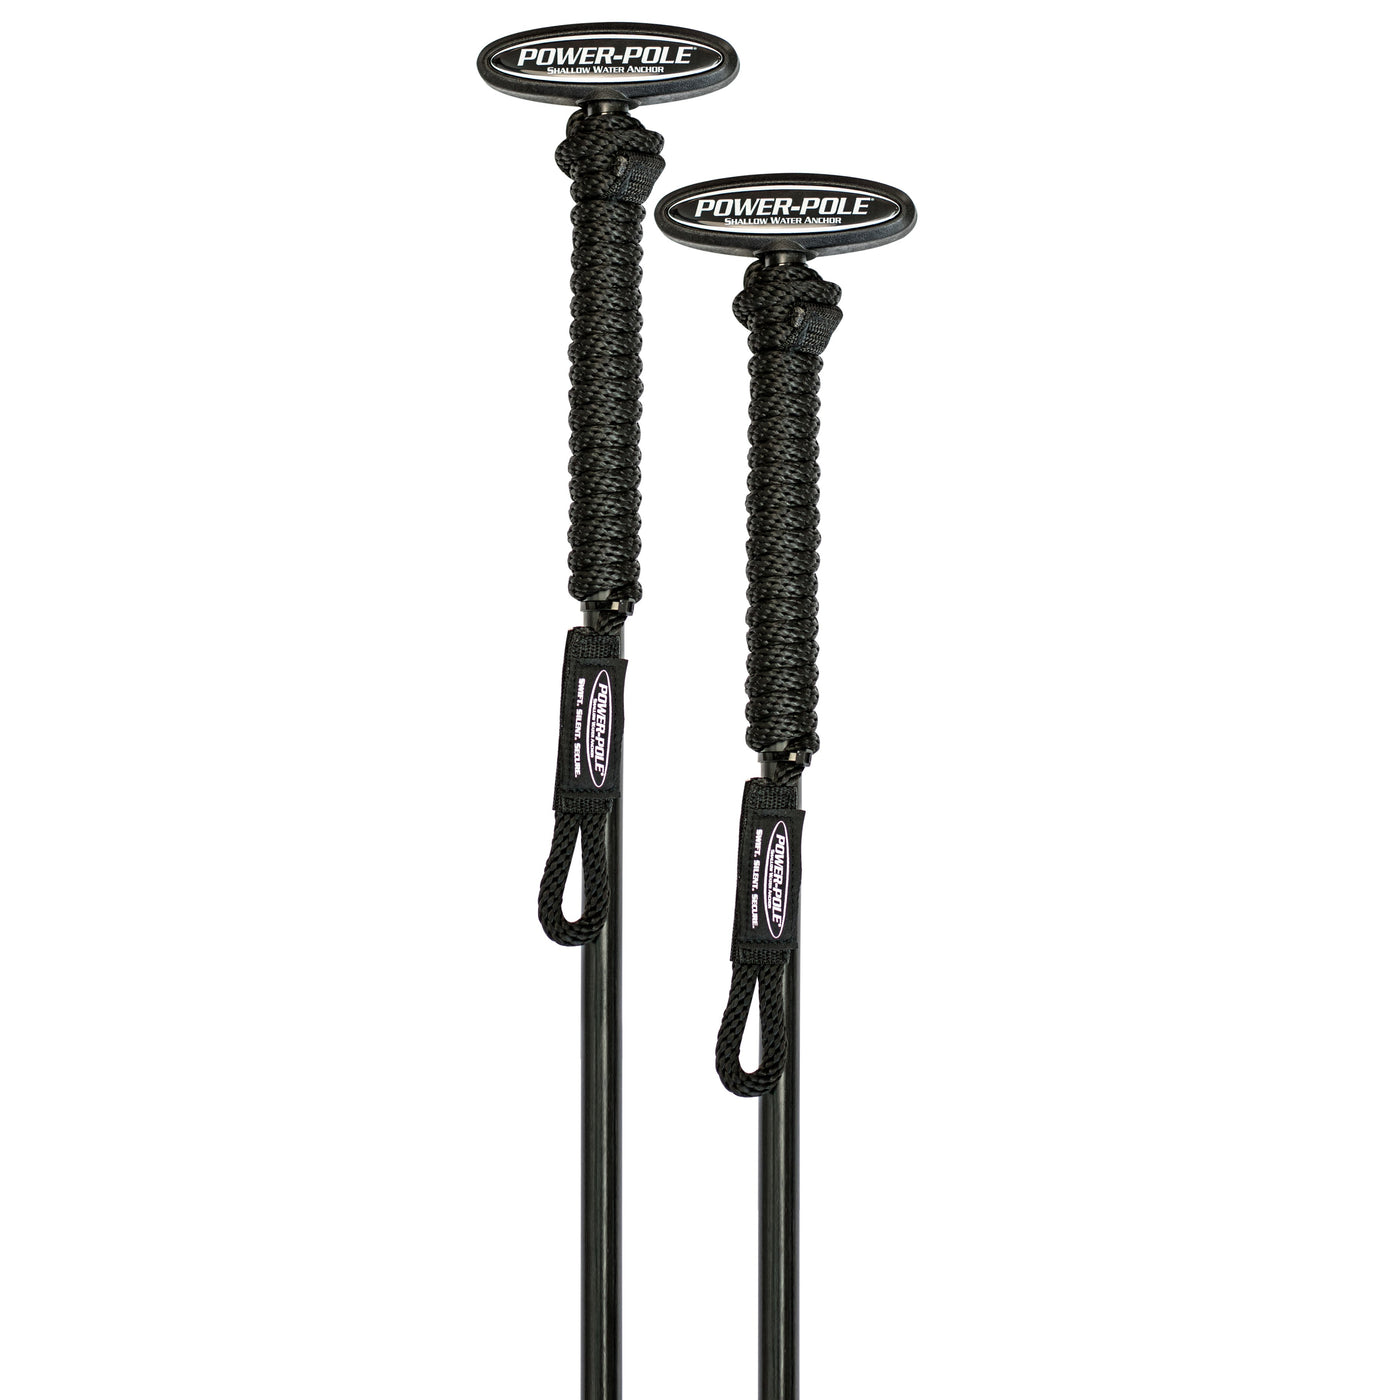  Impact Adjustable Pole with Socket and Fixed Ends